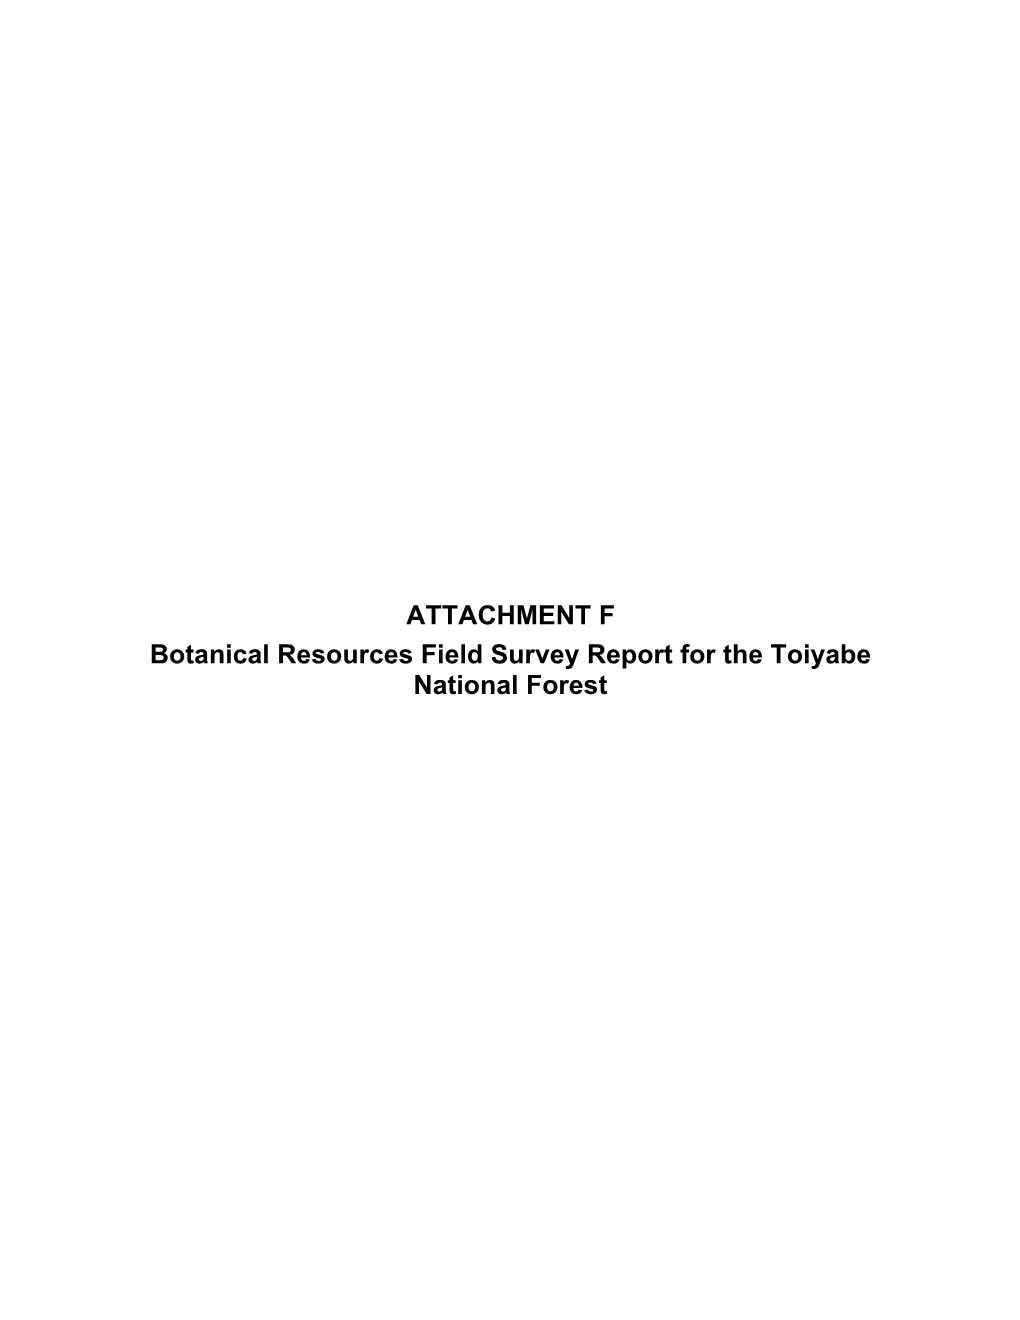 ATTACHMENT F Botanical Resources Field Survey Report for the Toiyabe National Forest